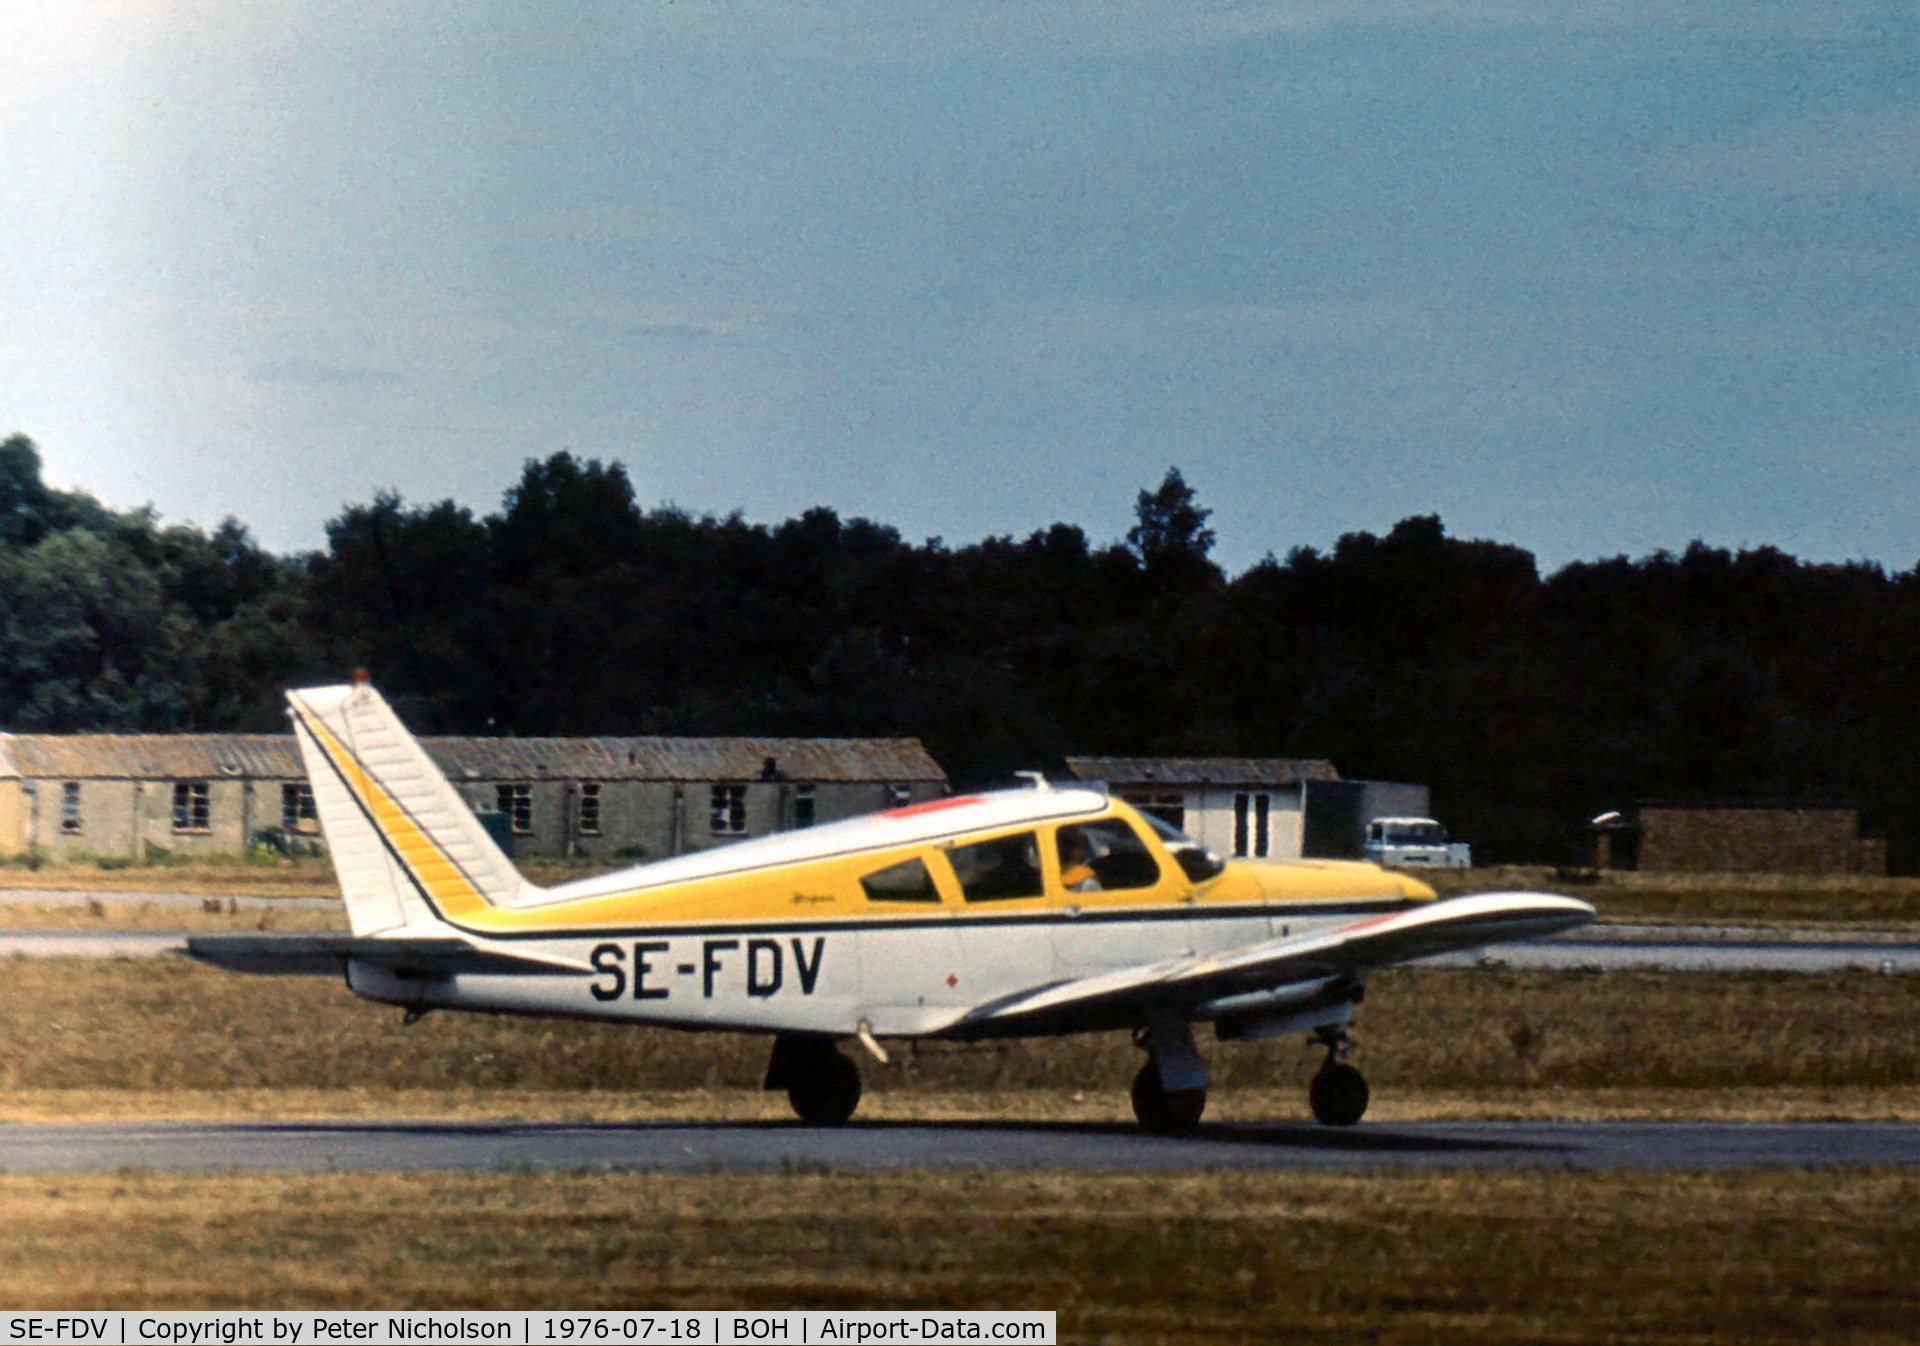 SE-FDV, 1968 Piper PA-28R-180 Cherokee Arrow C/N 28R-30729, PA-28R Cherokee Arrow 180 seen at Bournmouth Hurn in the Summer of 1976.